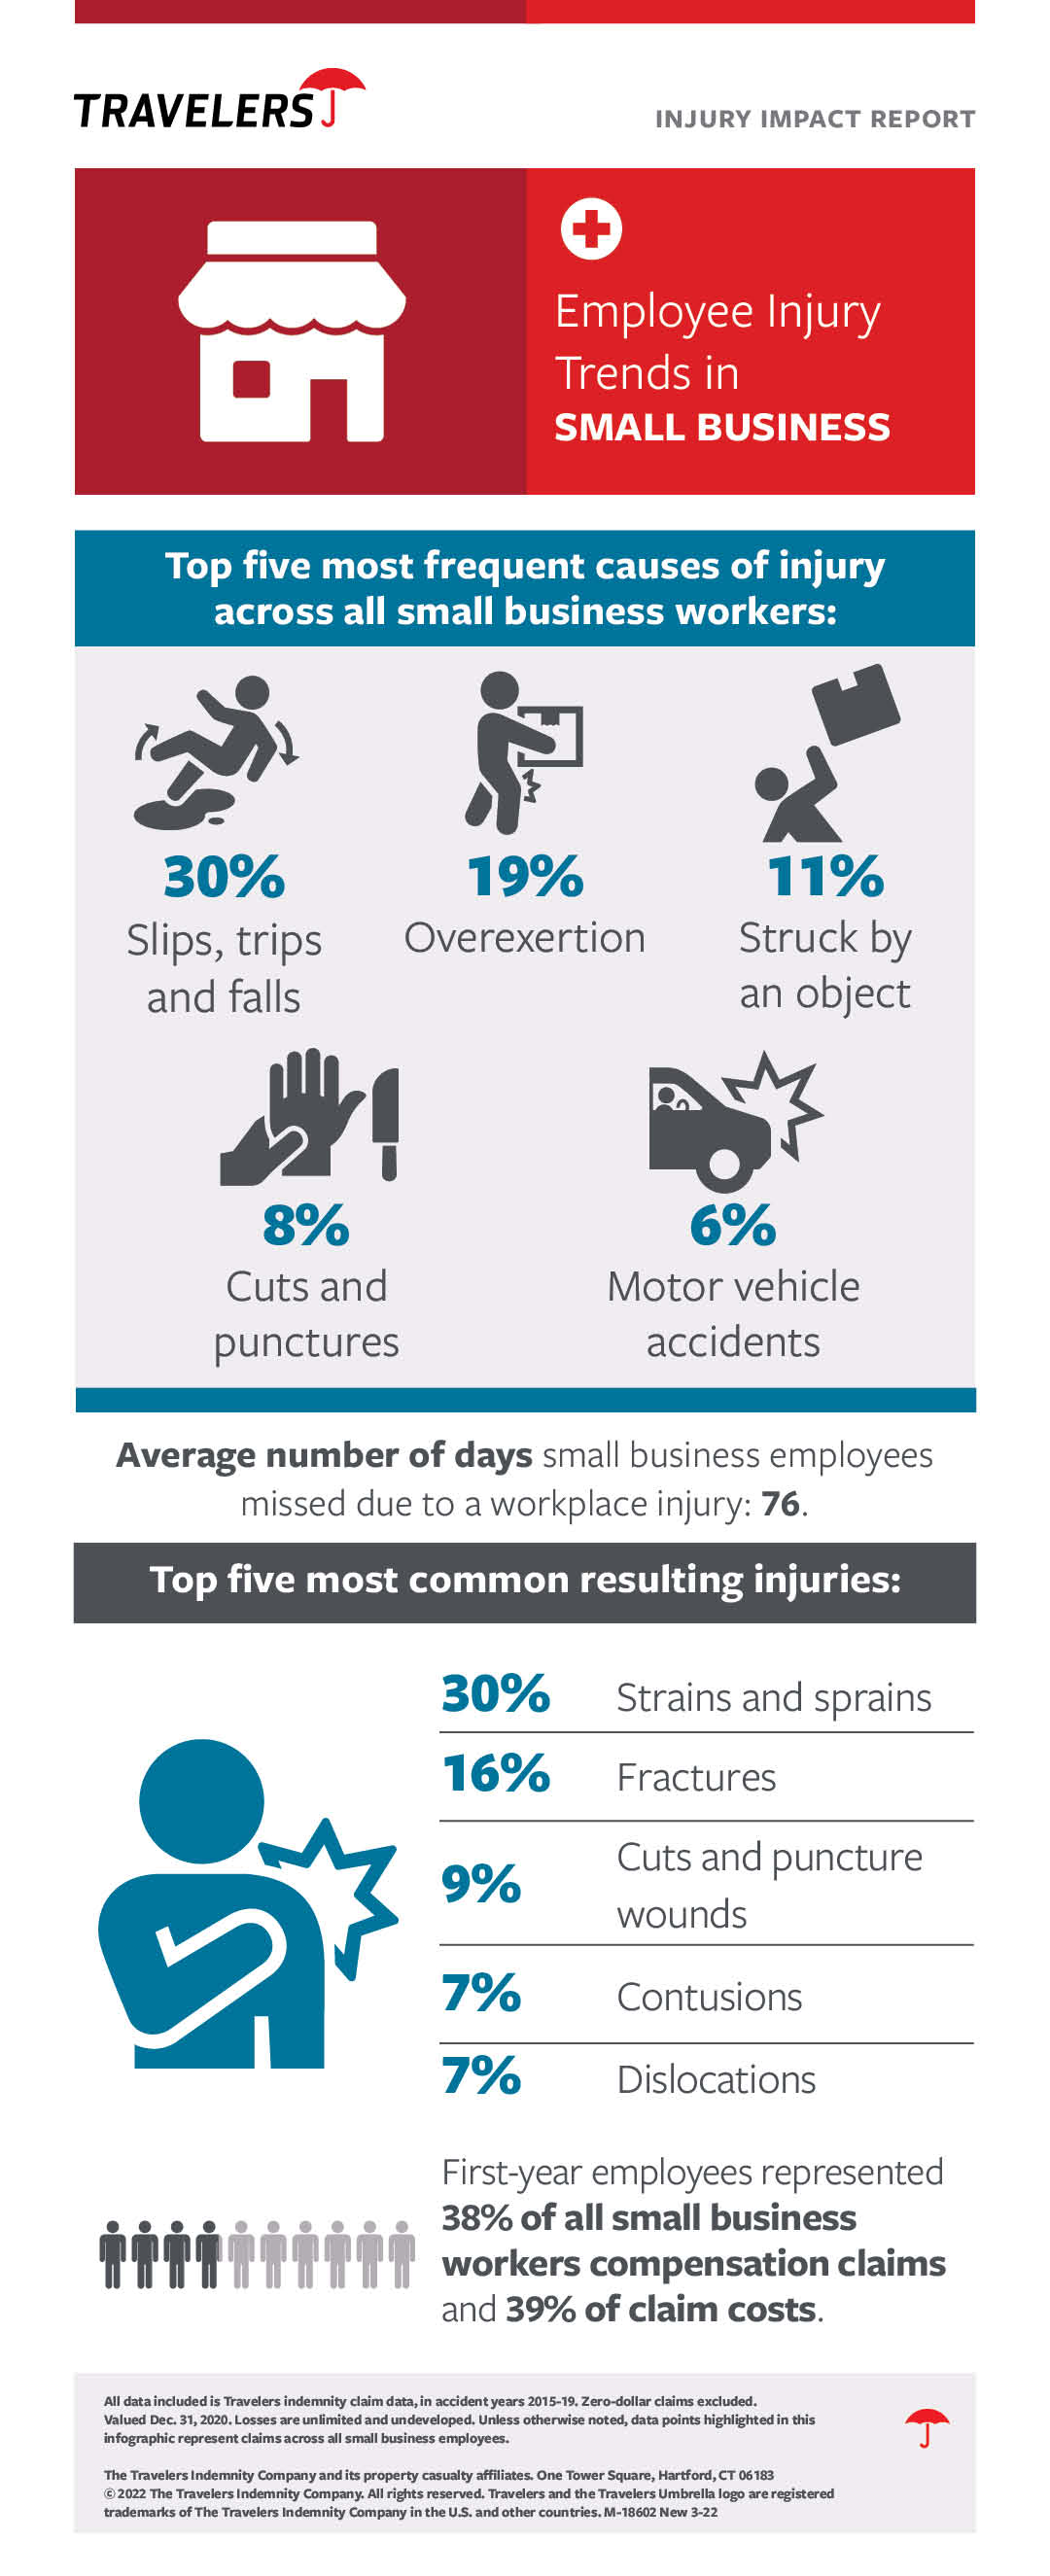 Employee Injury Trends in SMALL BUSINESS